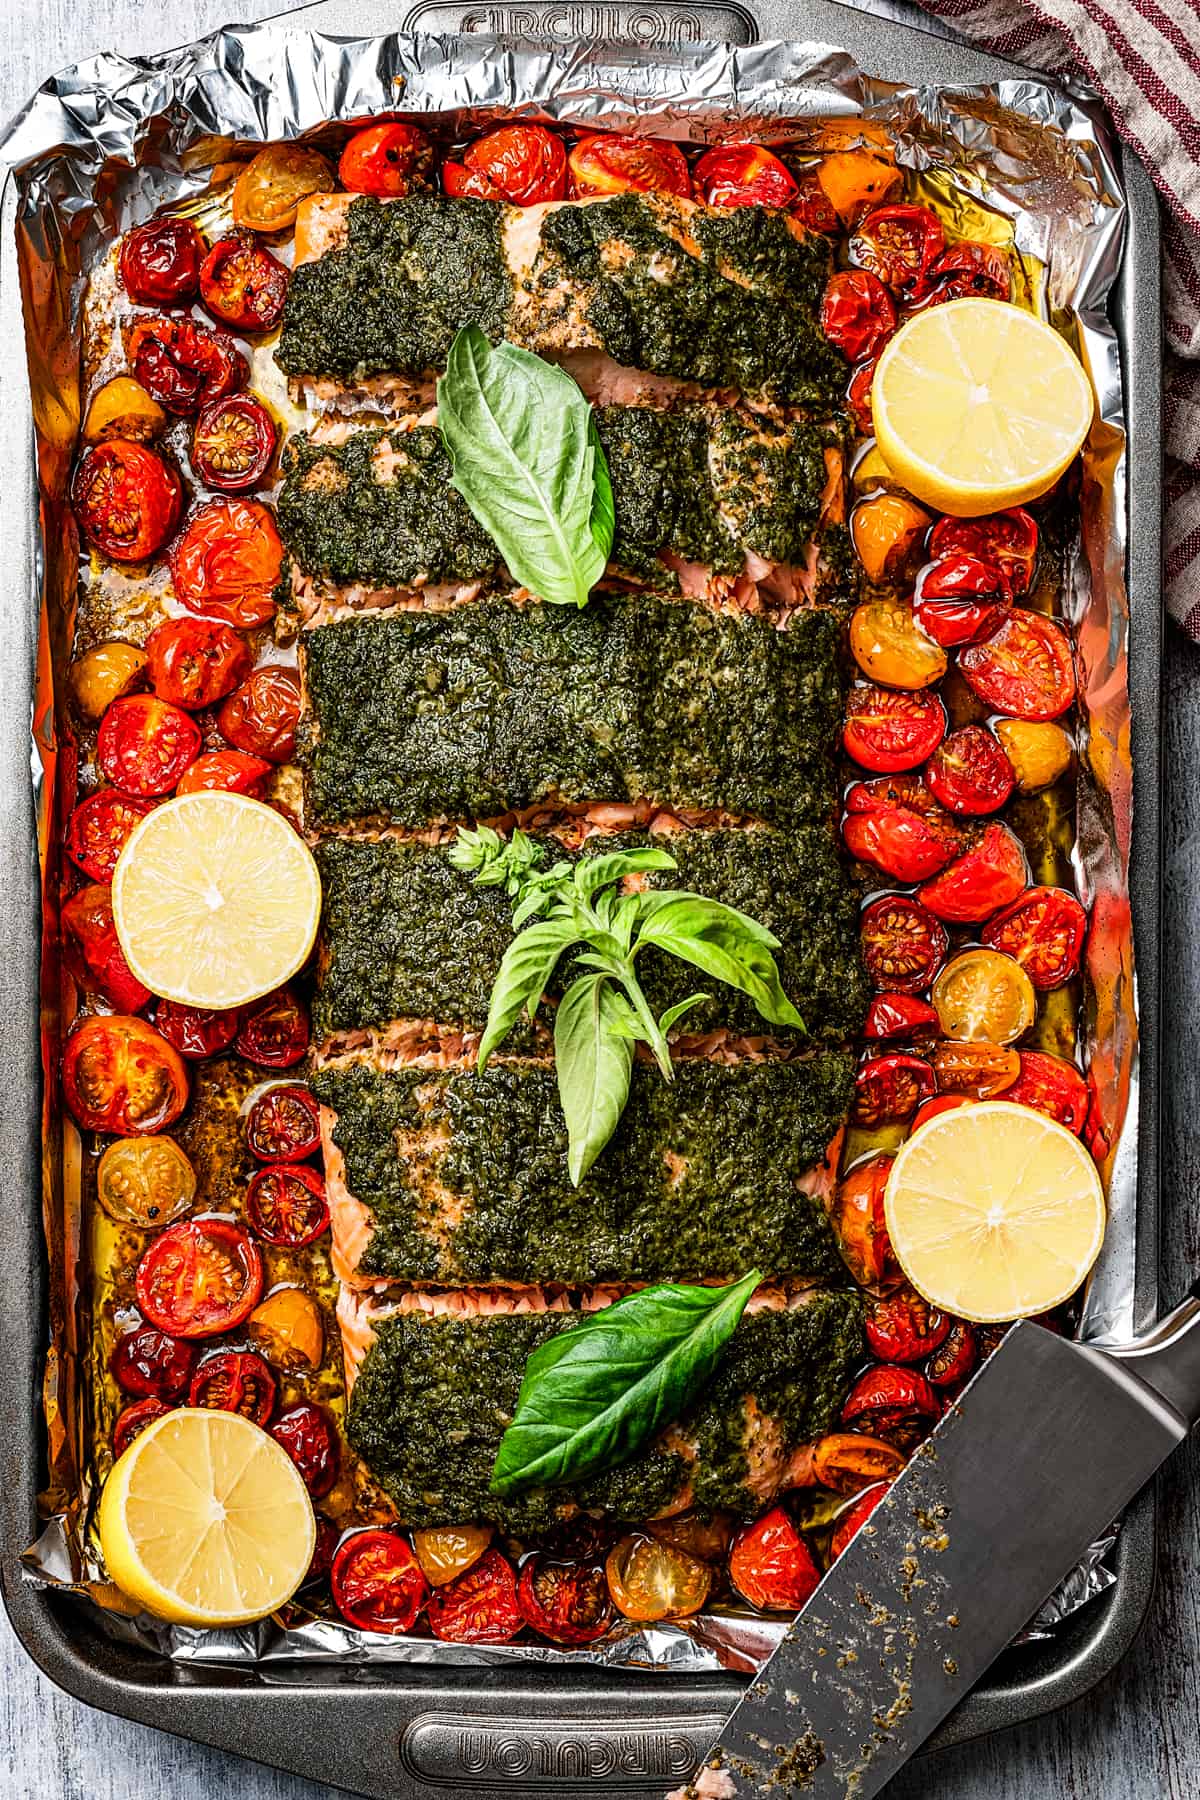 A tray of baked salmon with pesto, cherry tomatoes, and lemons.